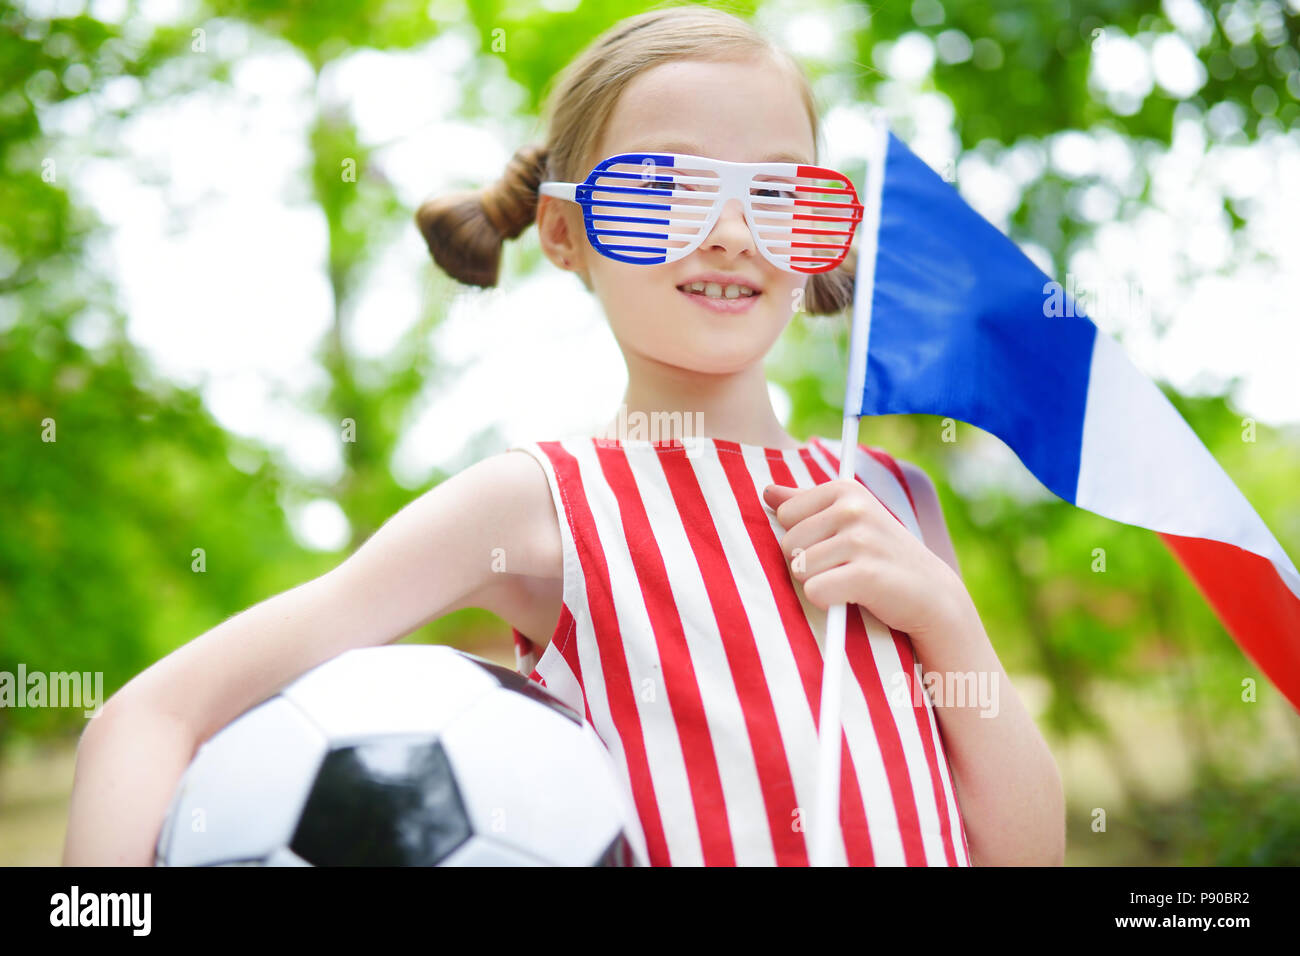 Adorable little soccer fan cheering on summer day Stock Photo